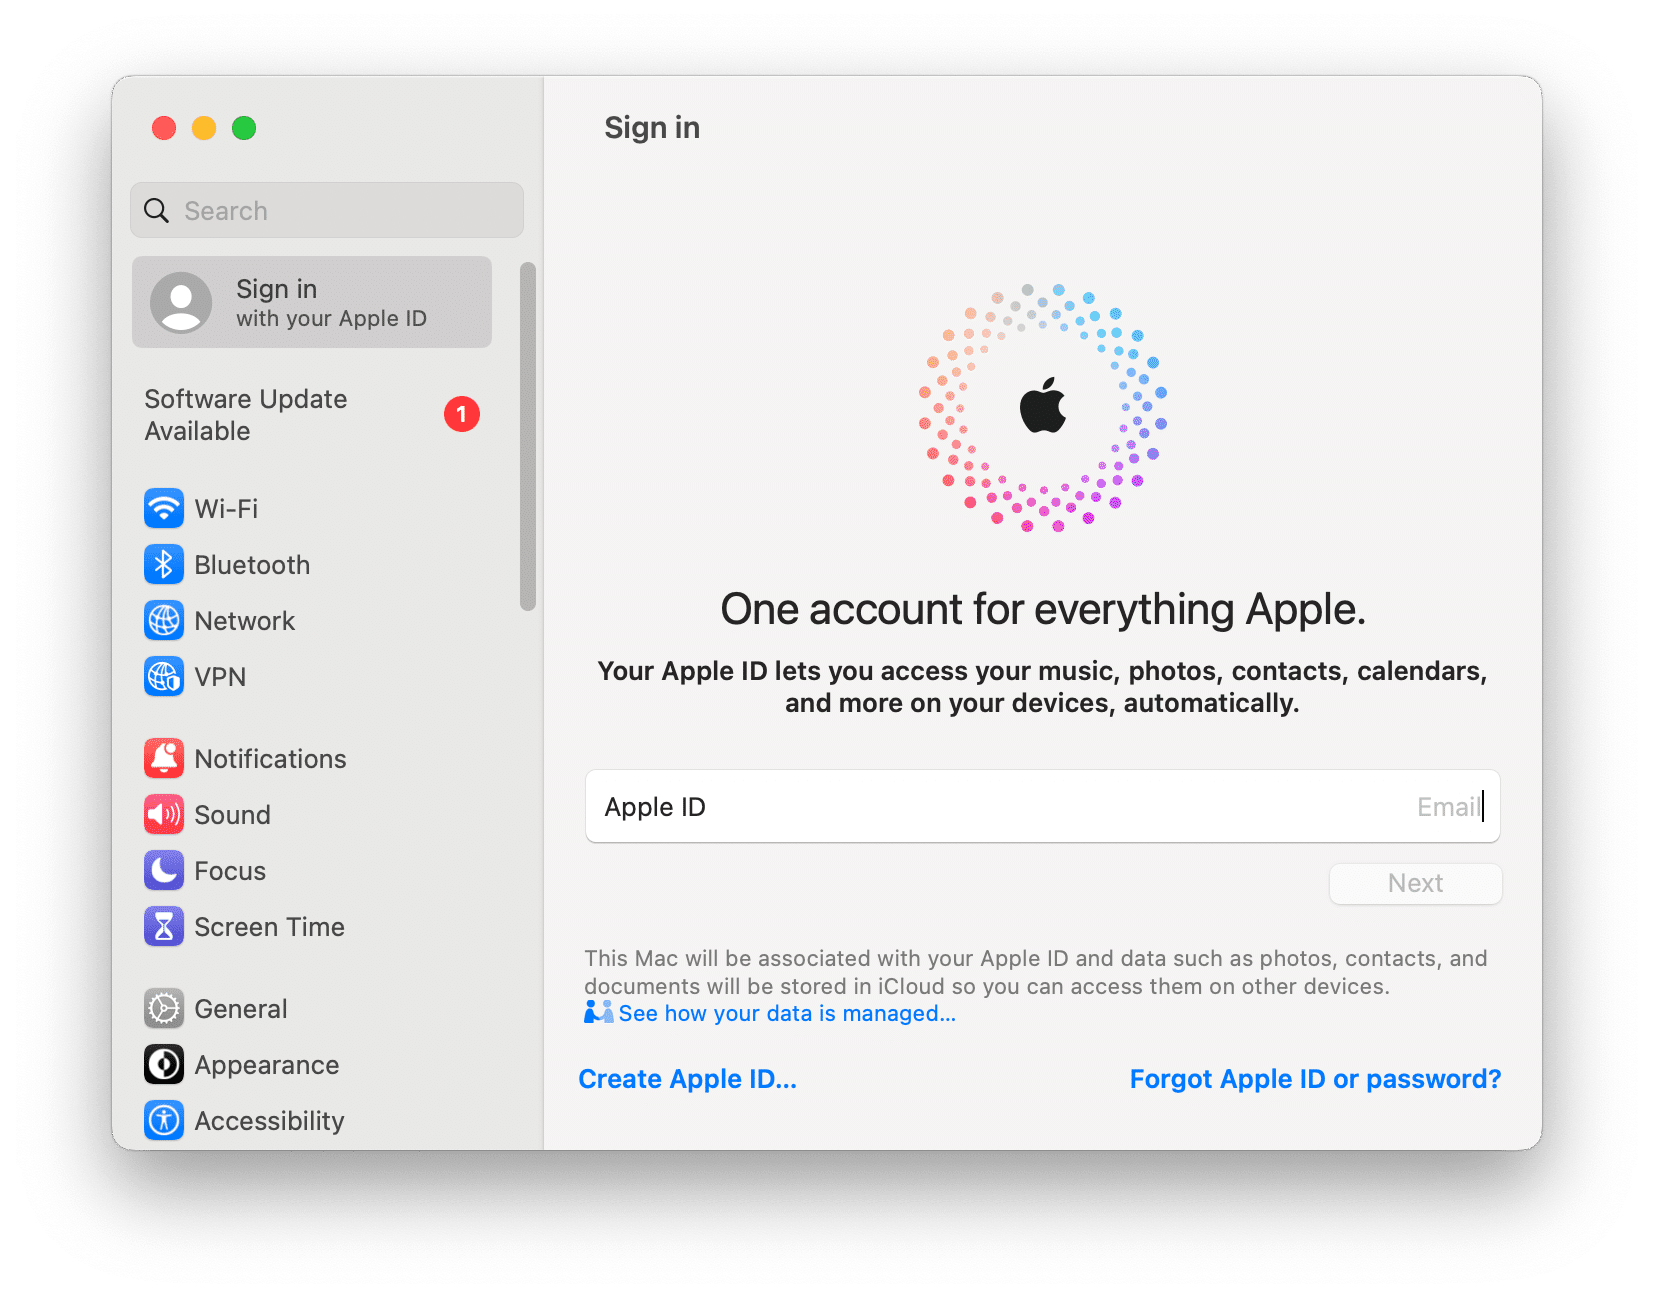 a window to sign in Apple ID